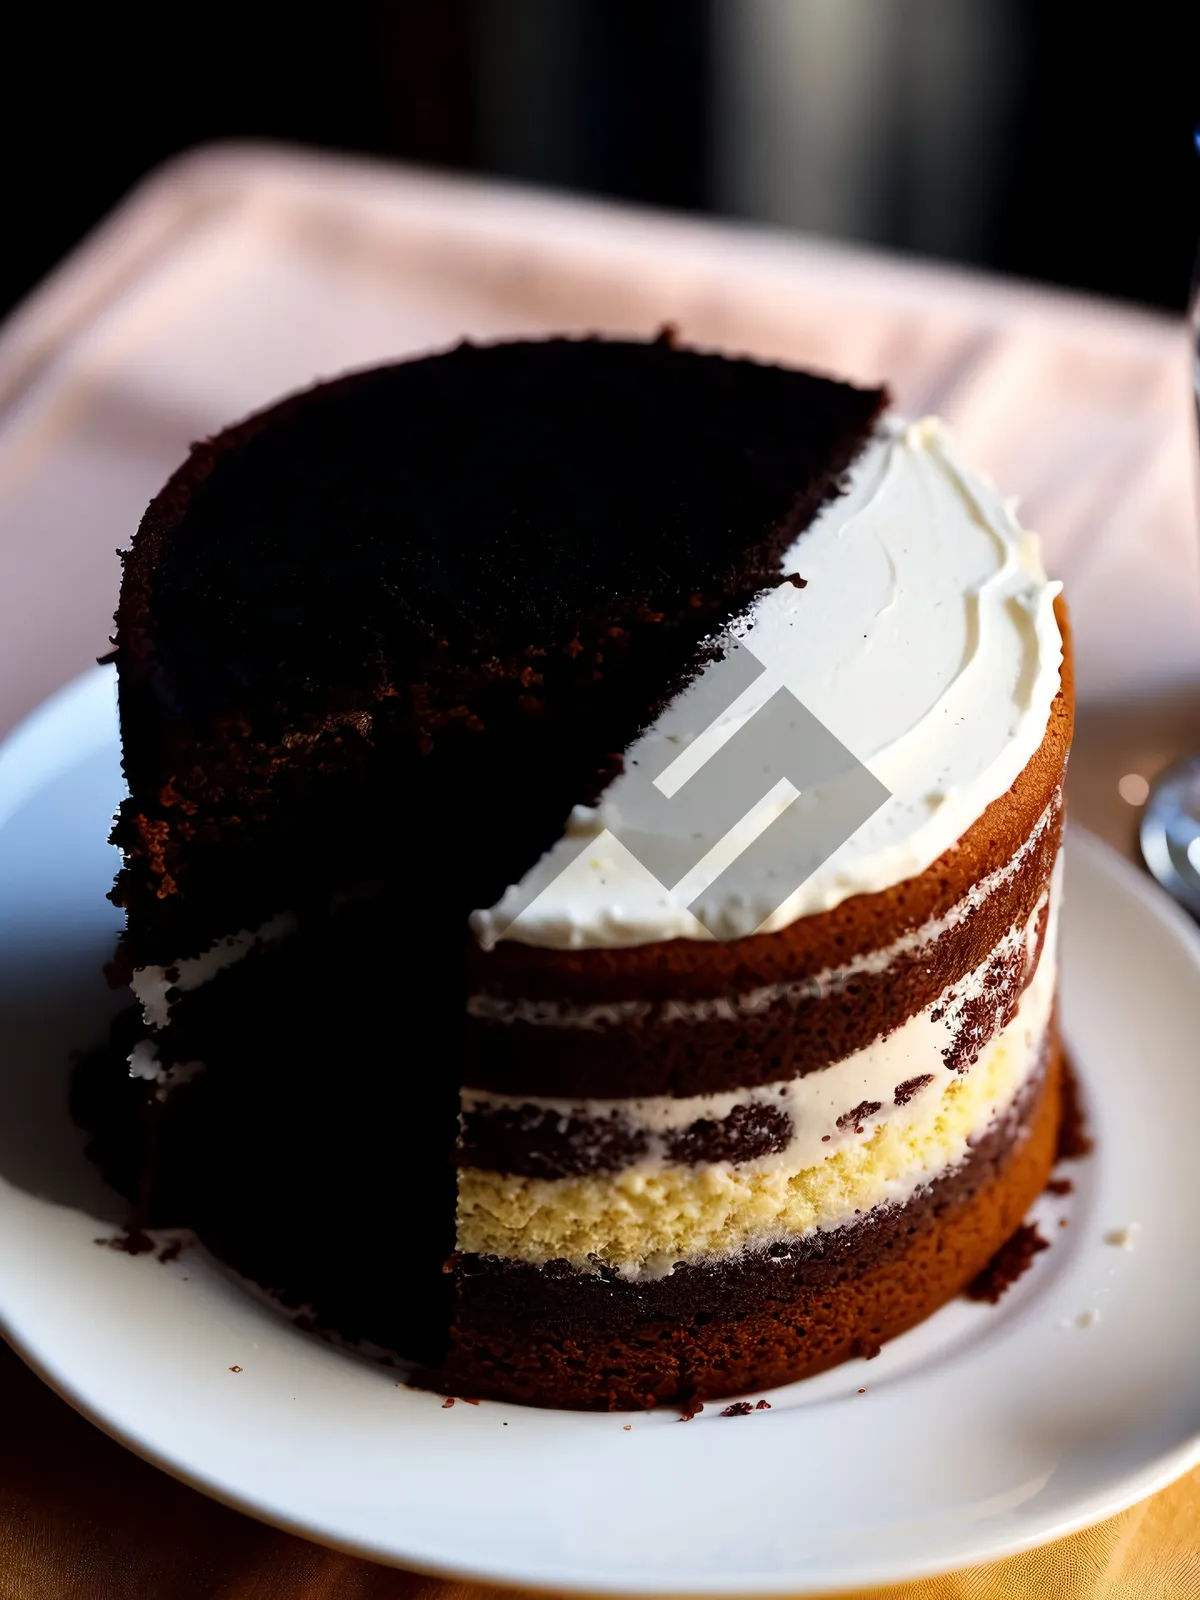 Picture of Delicious Chocolate Cake Slice with Rich Chocolate Sauce